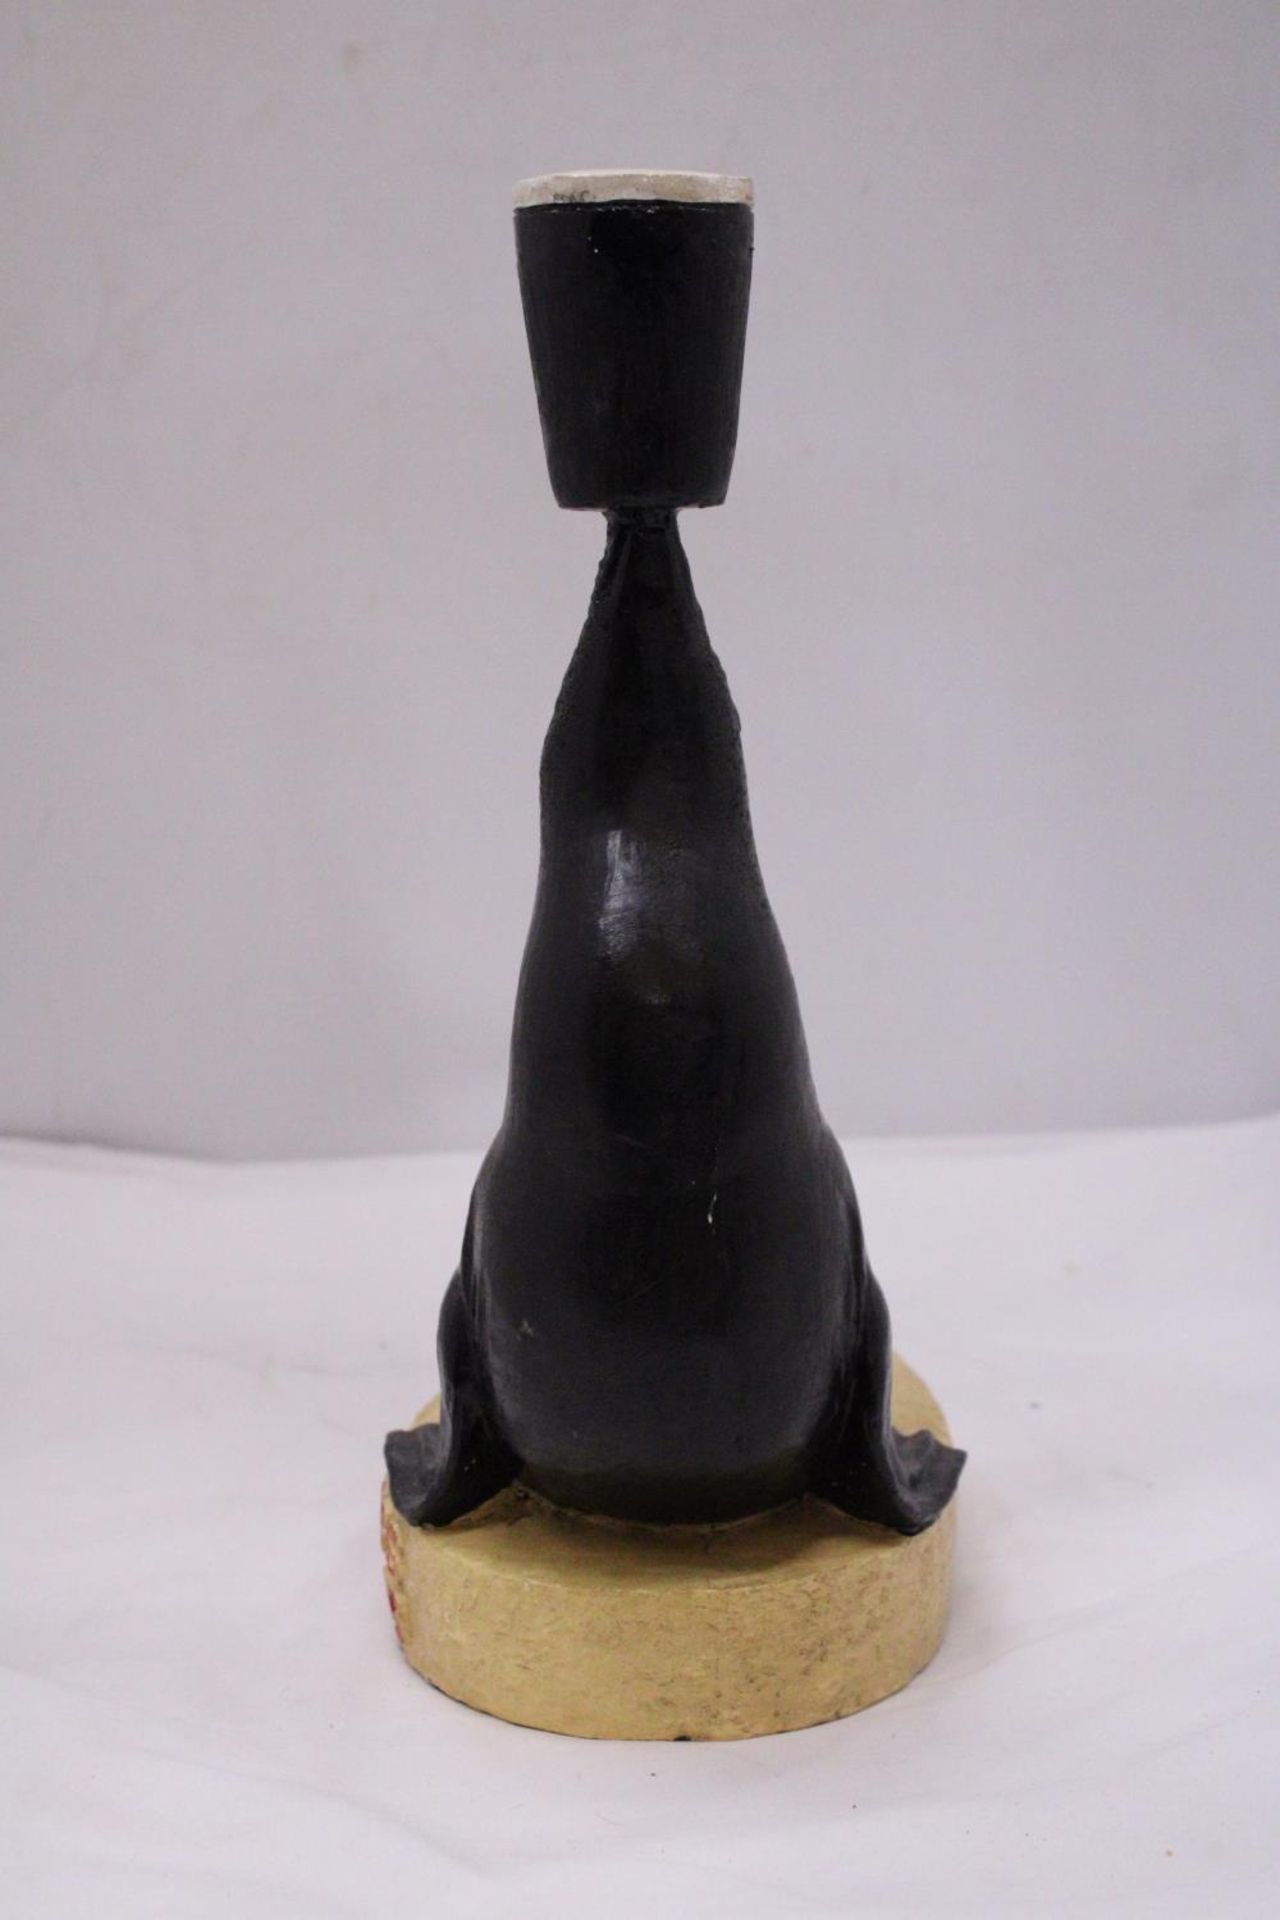 A MY GOODNESS MY GUINESS ADVERTISING RESIN SEAL APPROXIMATELY 11.5" TALL - Image 5 of 5